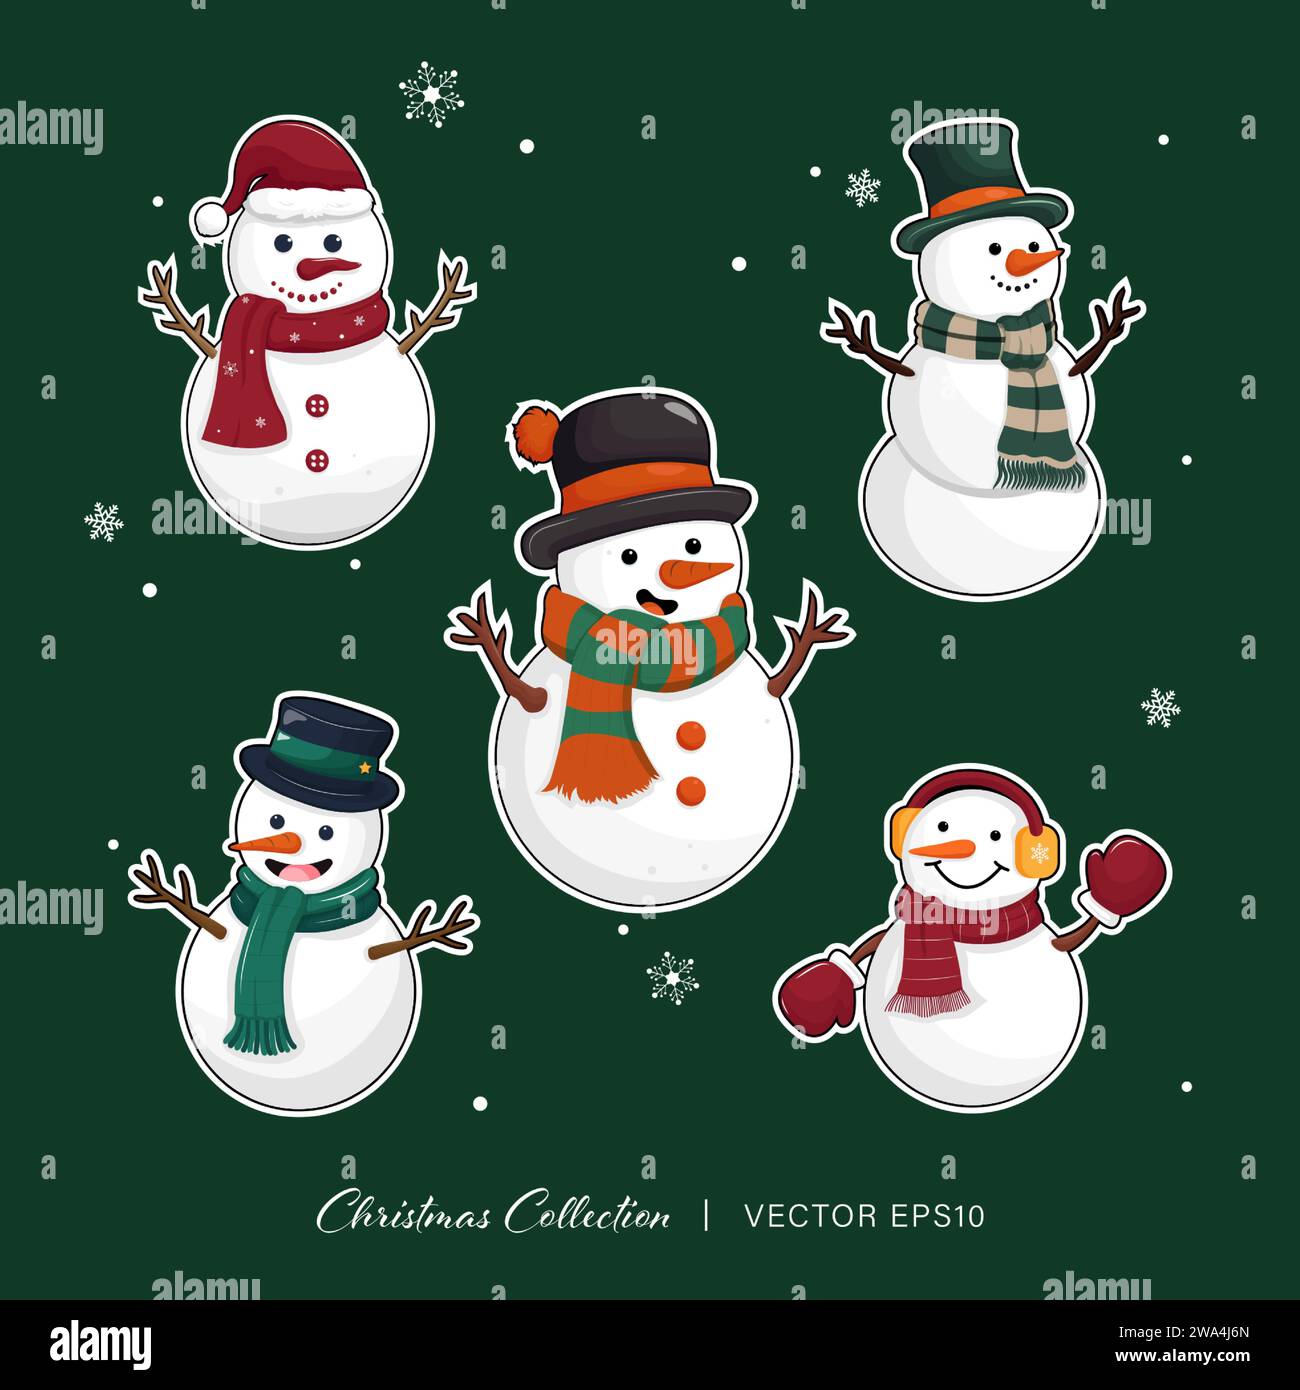 Sticker - Christmas Boxed Stickers - Greetings, Labels, Christmas Trees, Snowmen